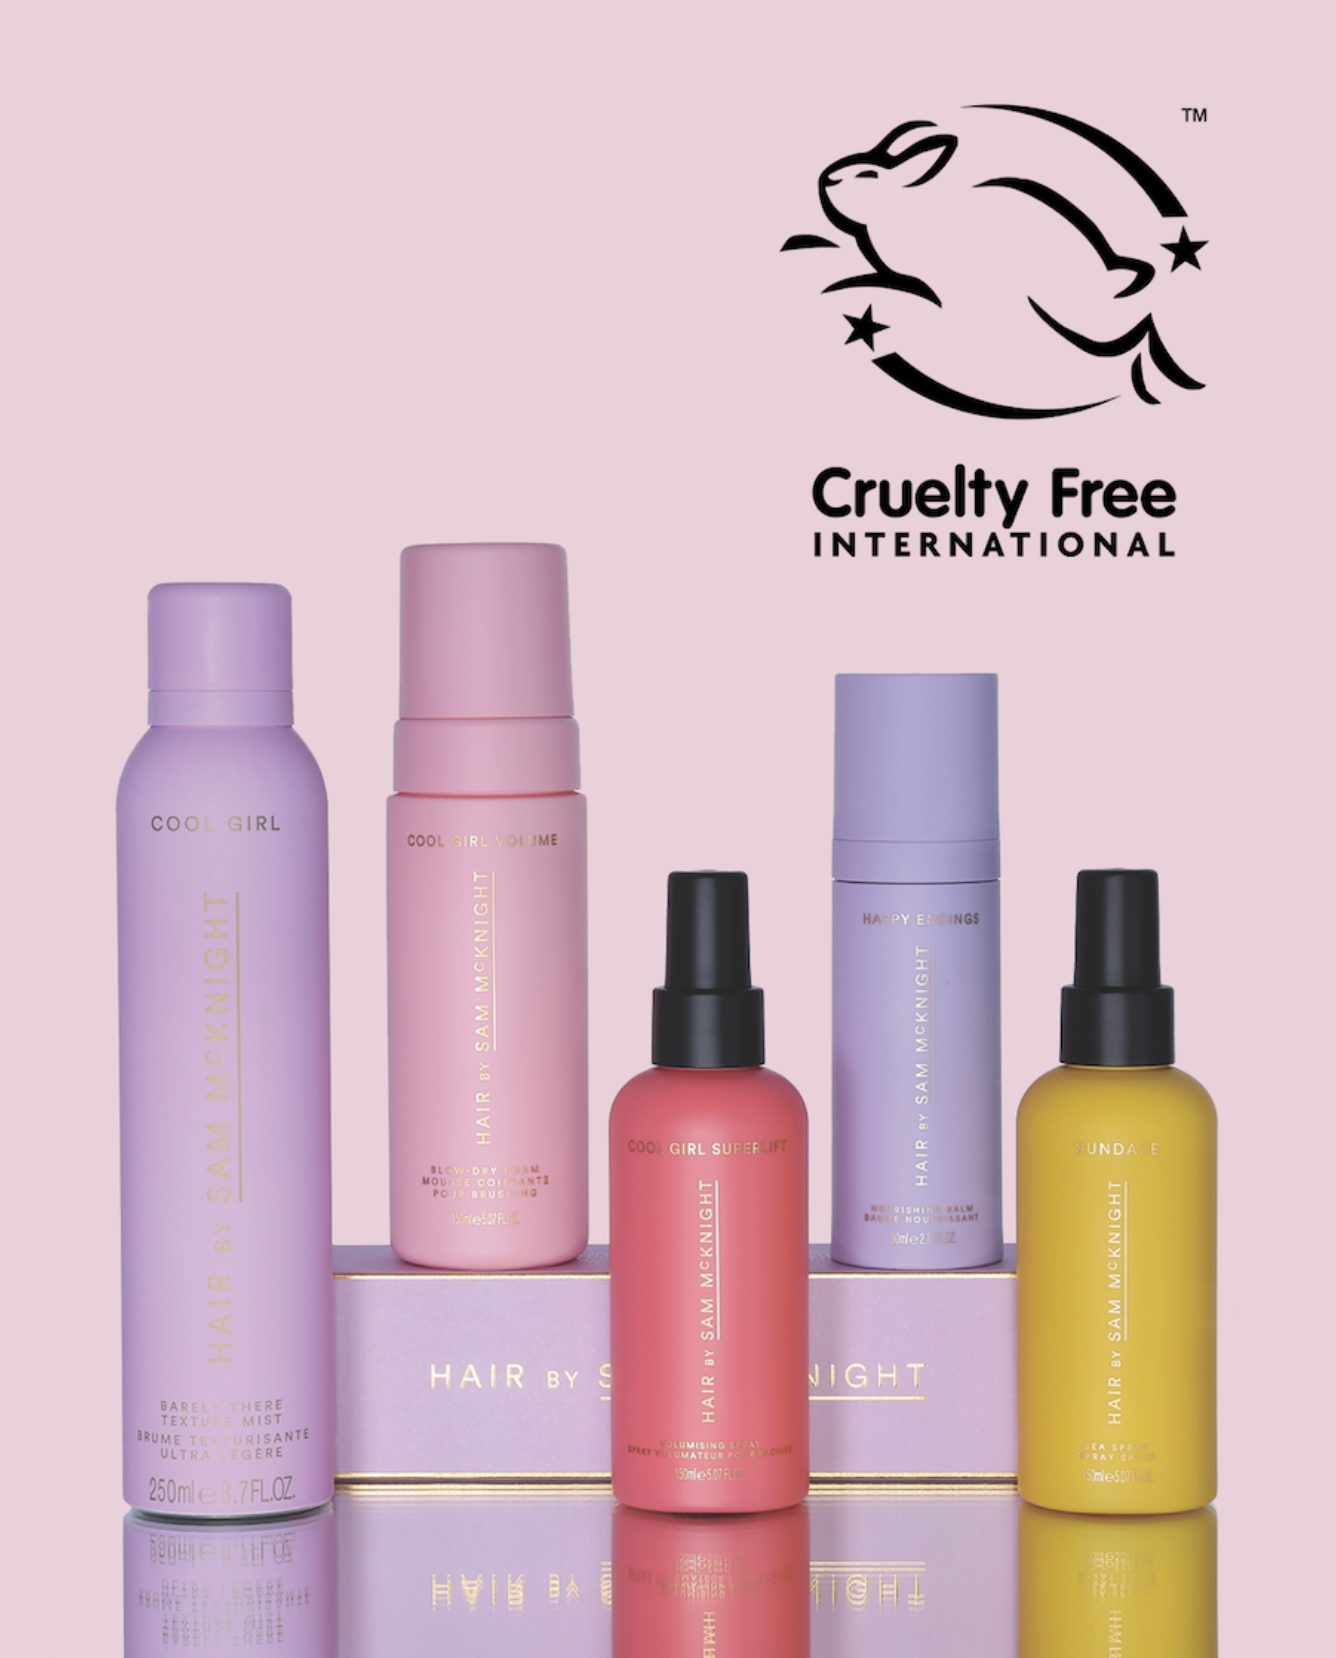 WE ARE PROUDLY CRUELTY FREE